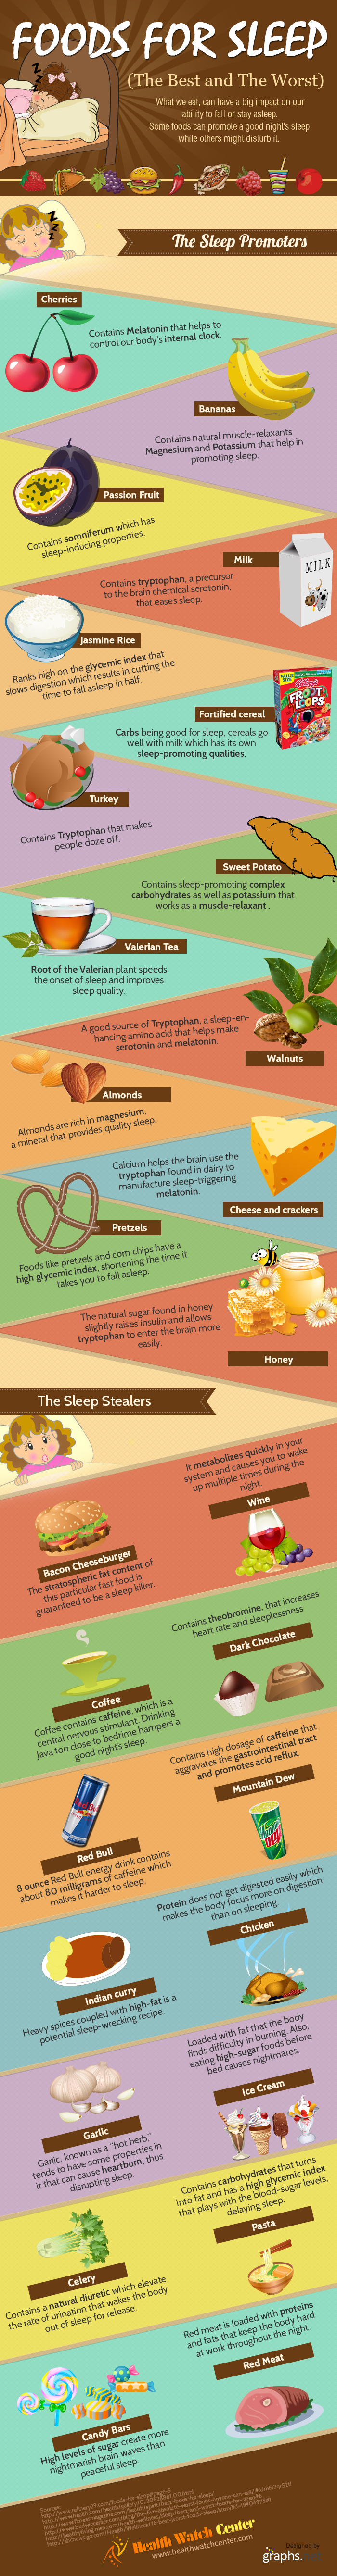 Foods For Sleep- The Best and The Worst